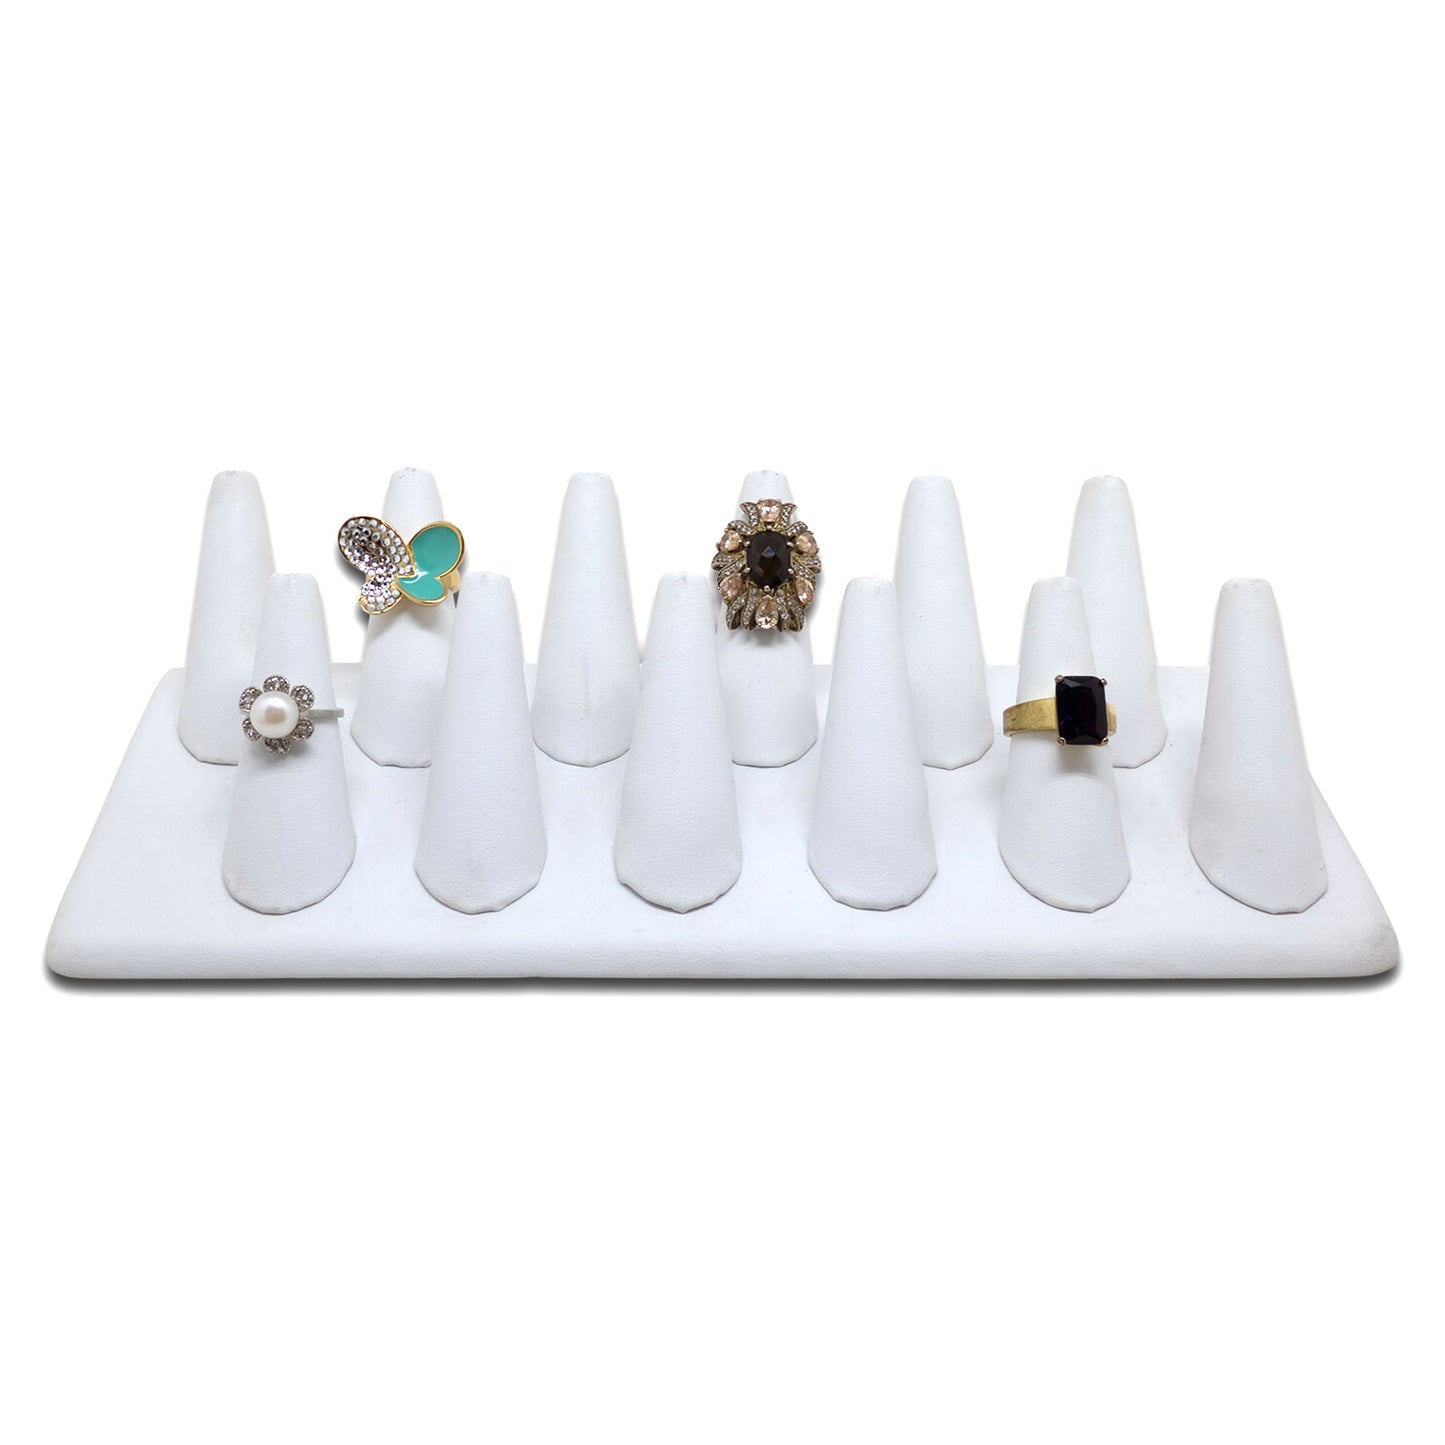 12 Finger White Leatherette Ring Jewelry Display